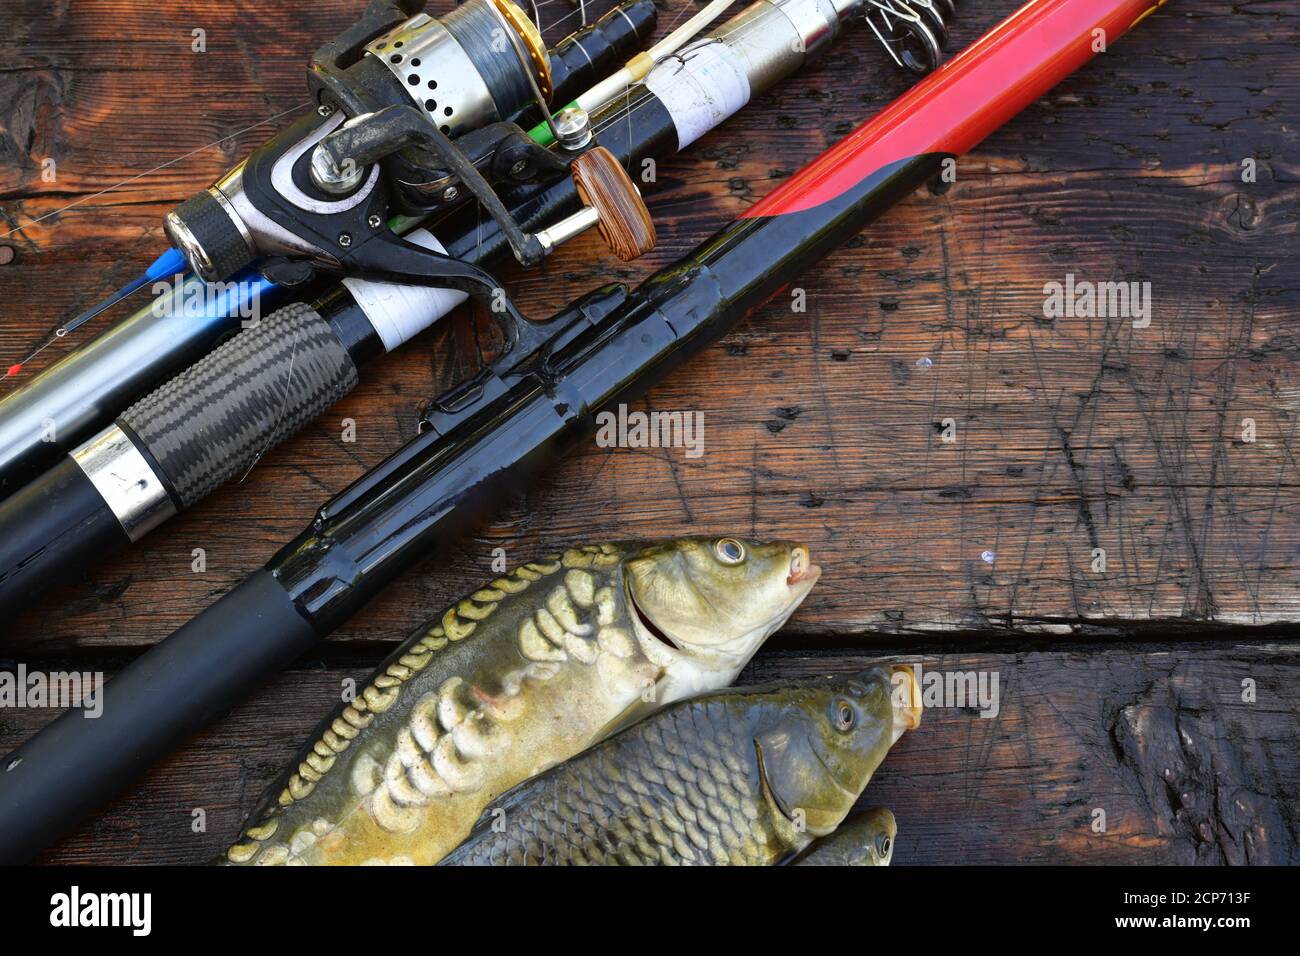 https://c8.alamy.com/comp/2CP713F/fishing-rods-and-spinning-with-coils-on-a-wet-wooden-background-with-three-fish-in-a-row-2CP713F.jpg